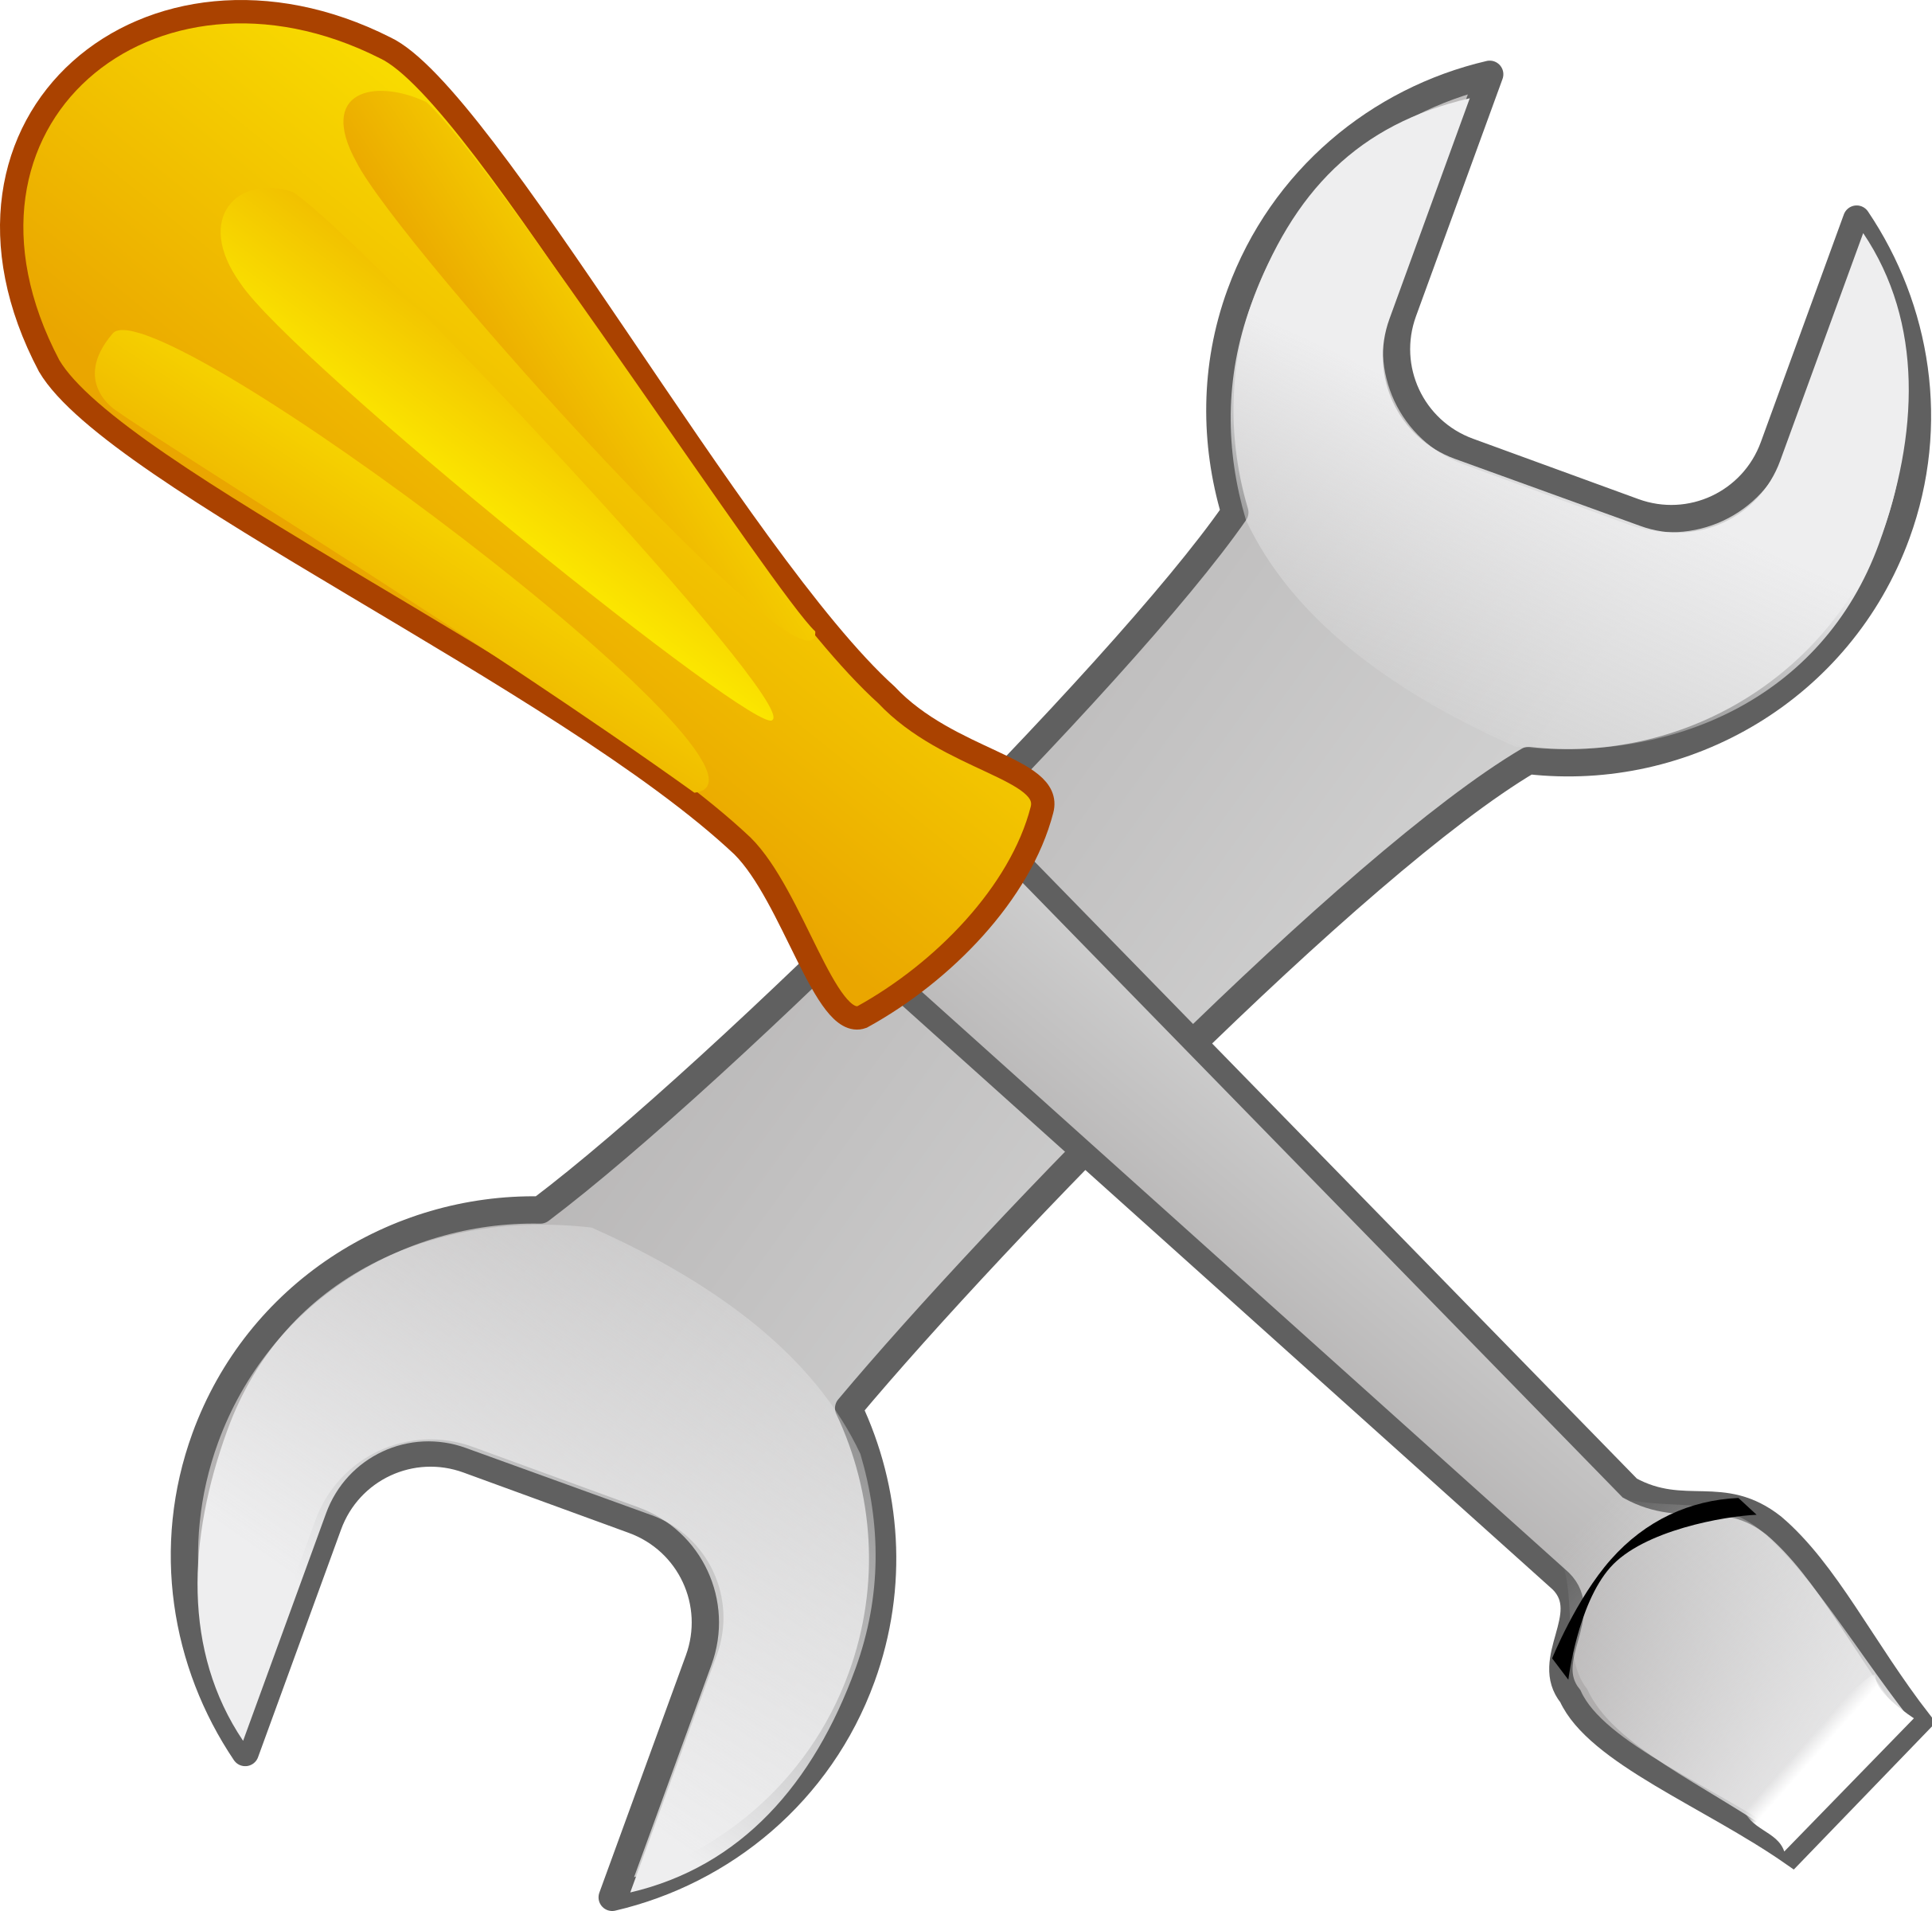 Screwdriver and Wrench Vector Clipart image Free stock 